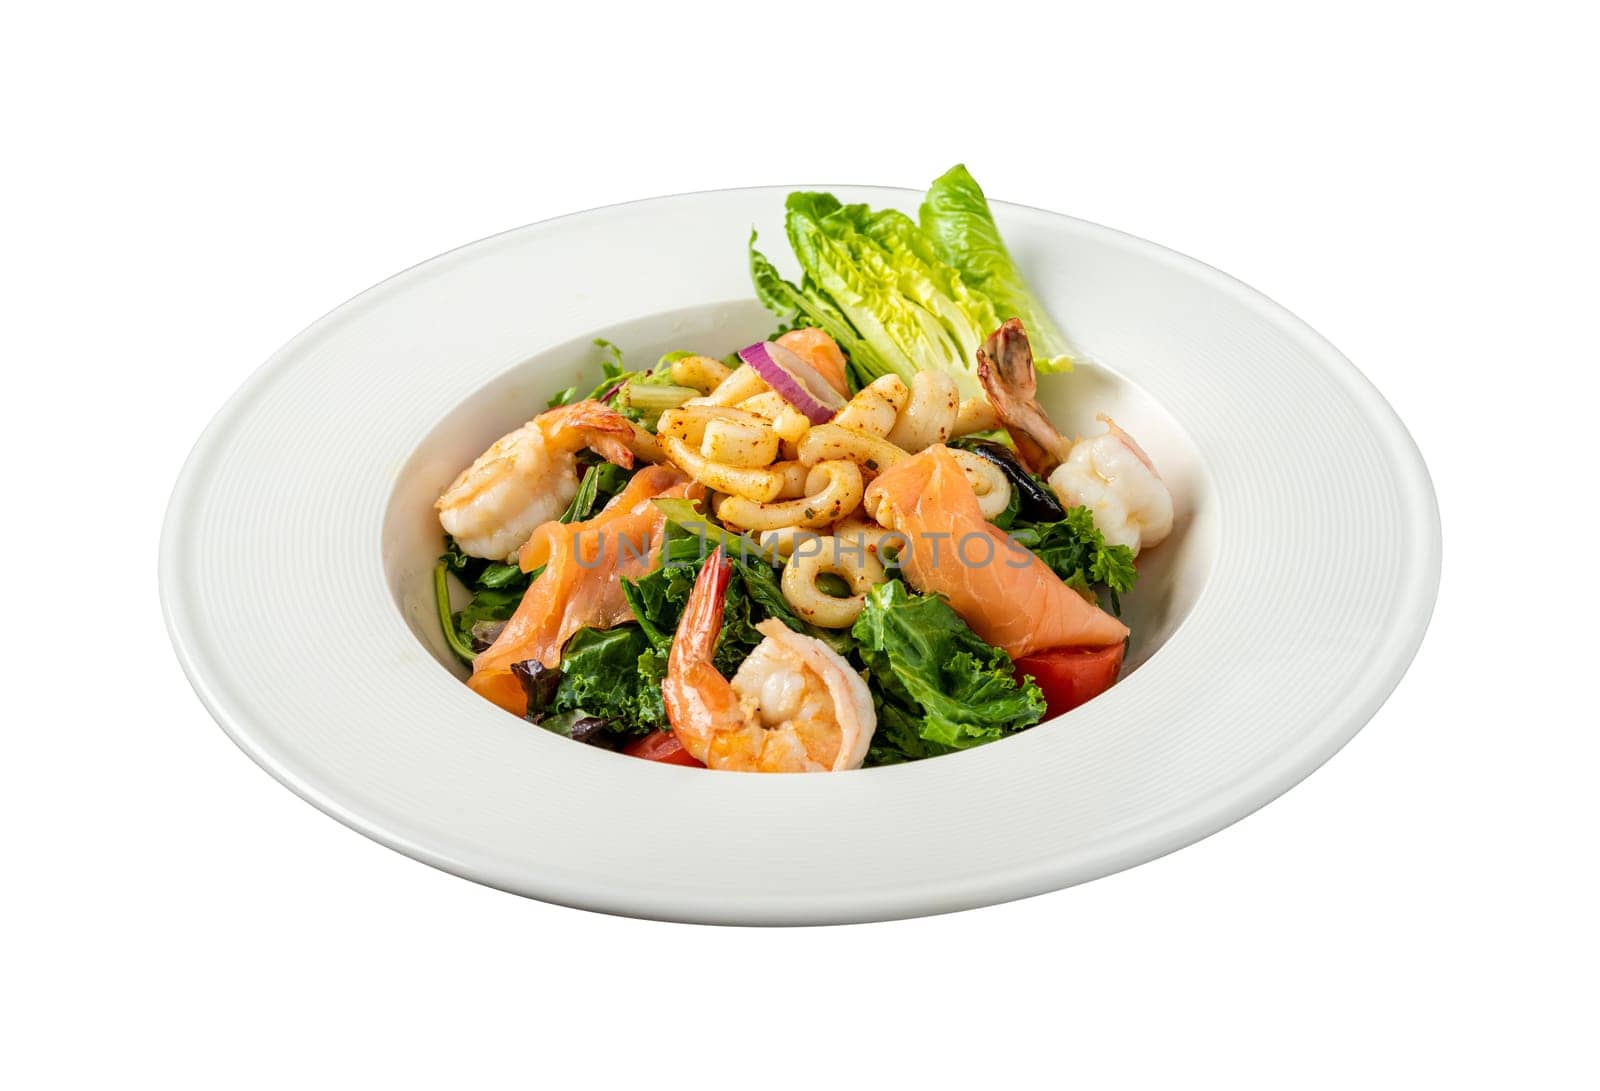 Cold Seafood Salad with Shrimp, Tuna and Octopus by Sonat